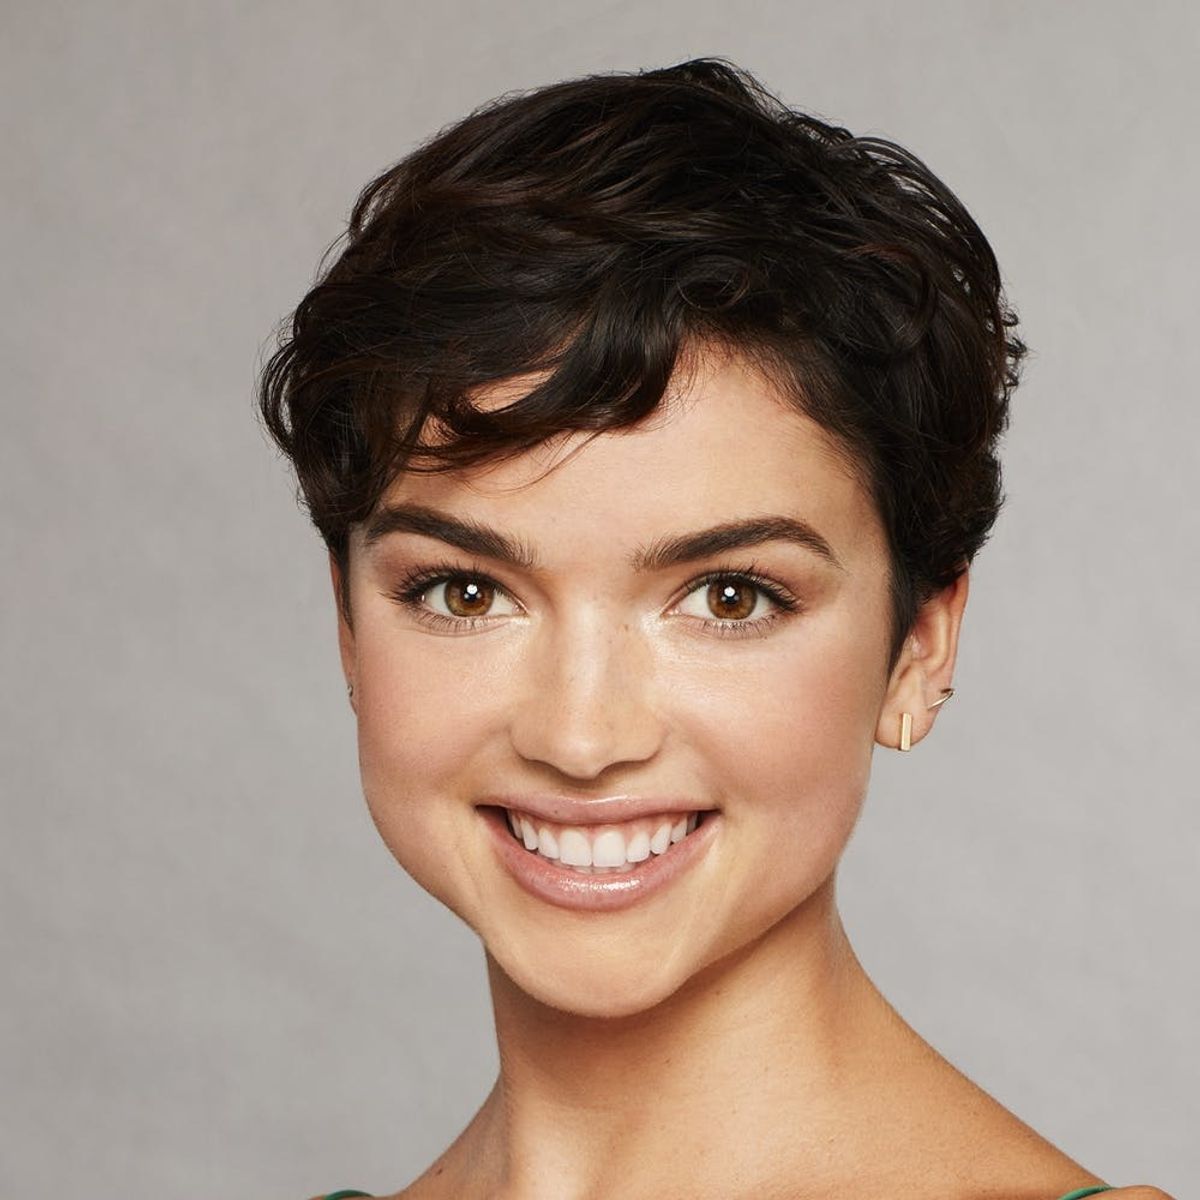 Here’s Why This ‘The Bachelor’ Contestant’s Hair Is Causing a Stir